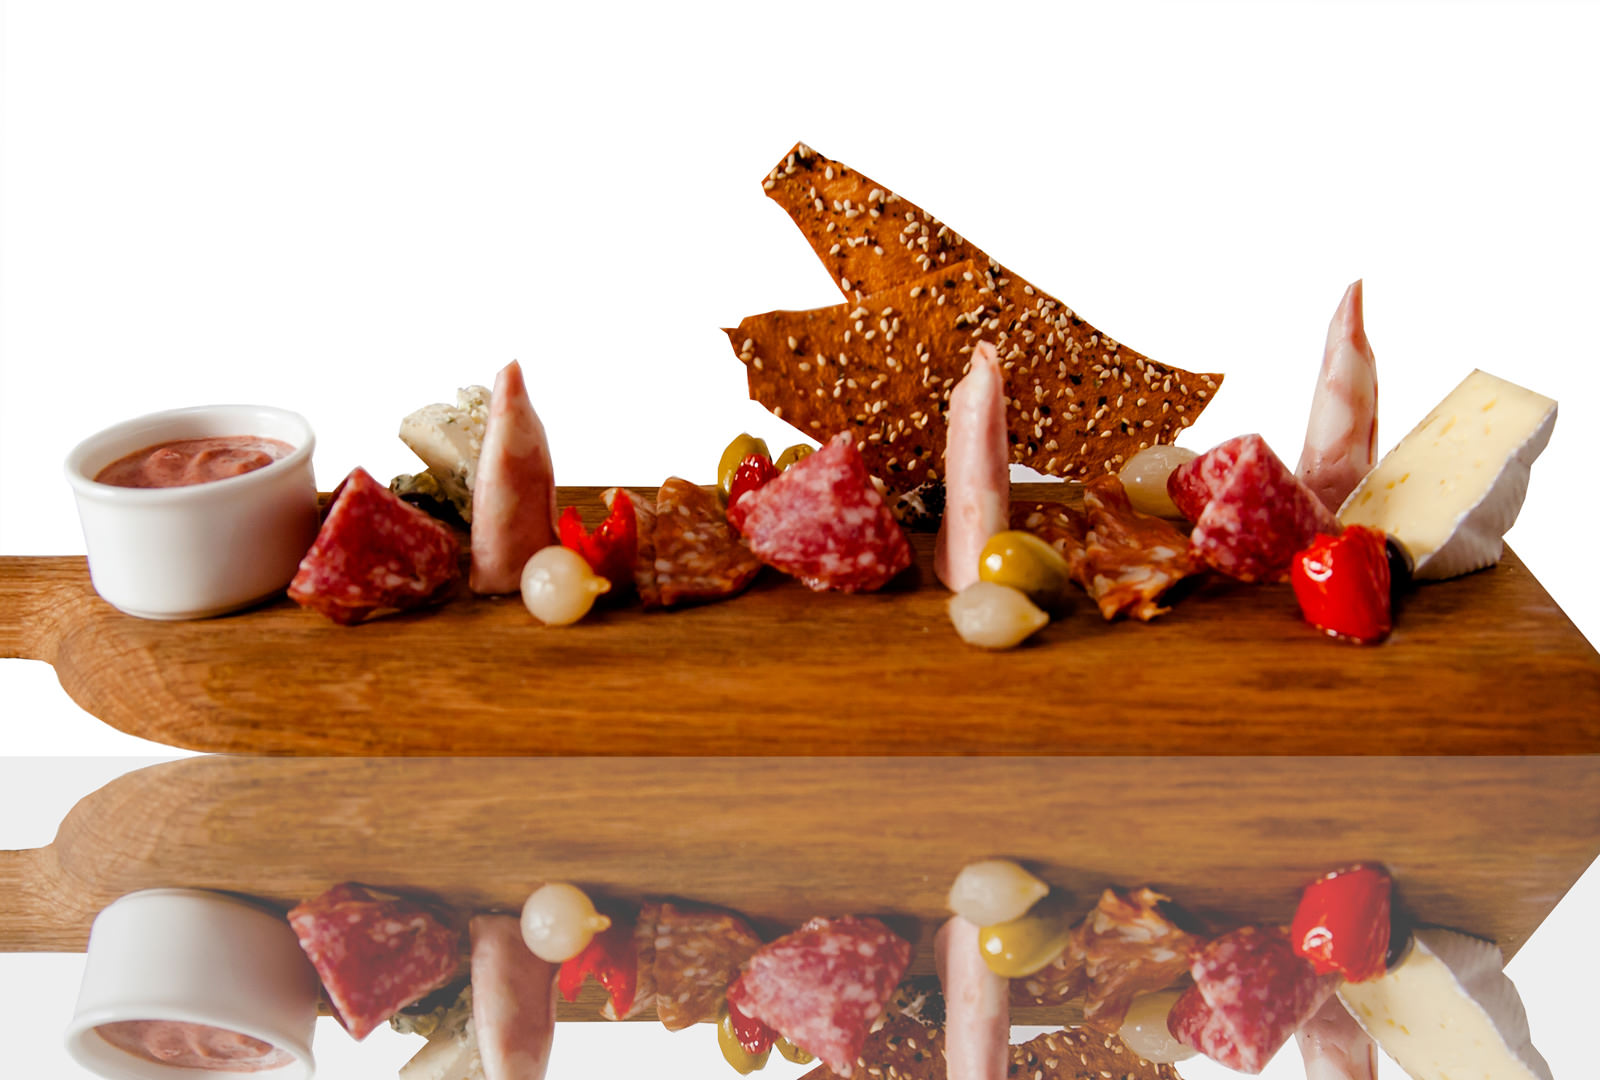 The Grand America Hotel Antipasto Including Local & International Cheeses & Charcuterie Cured Meats